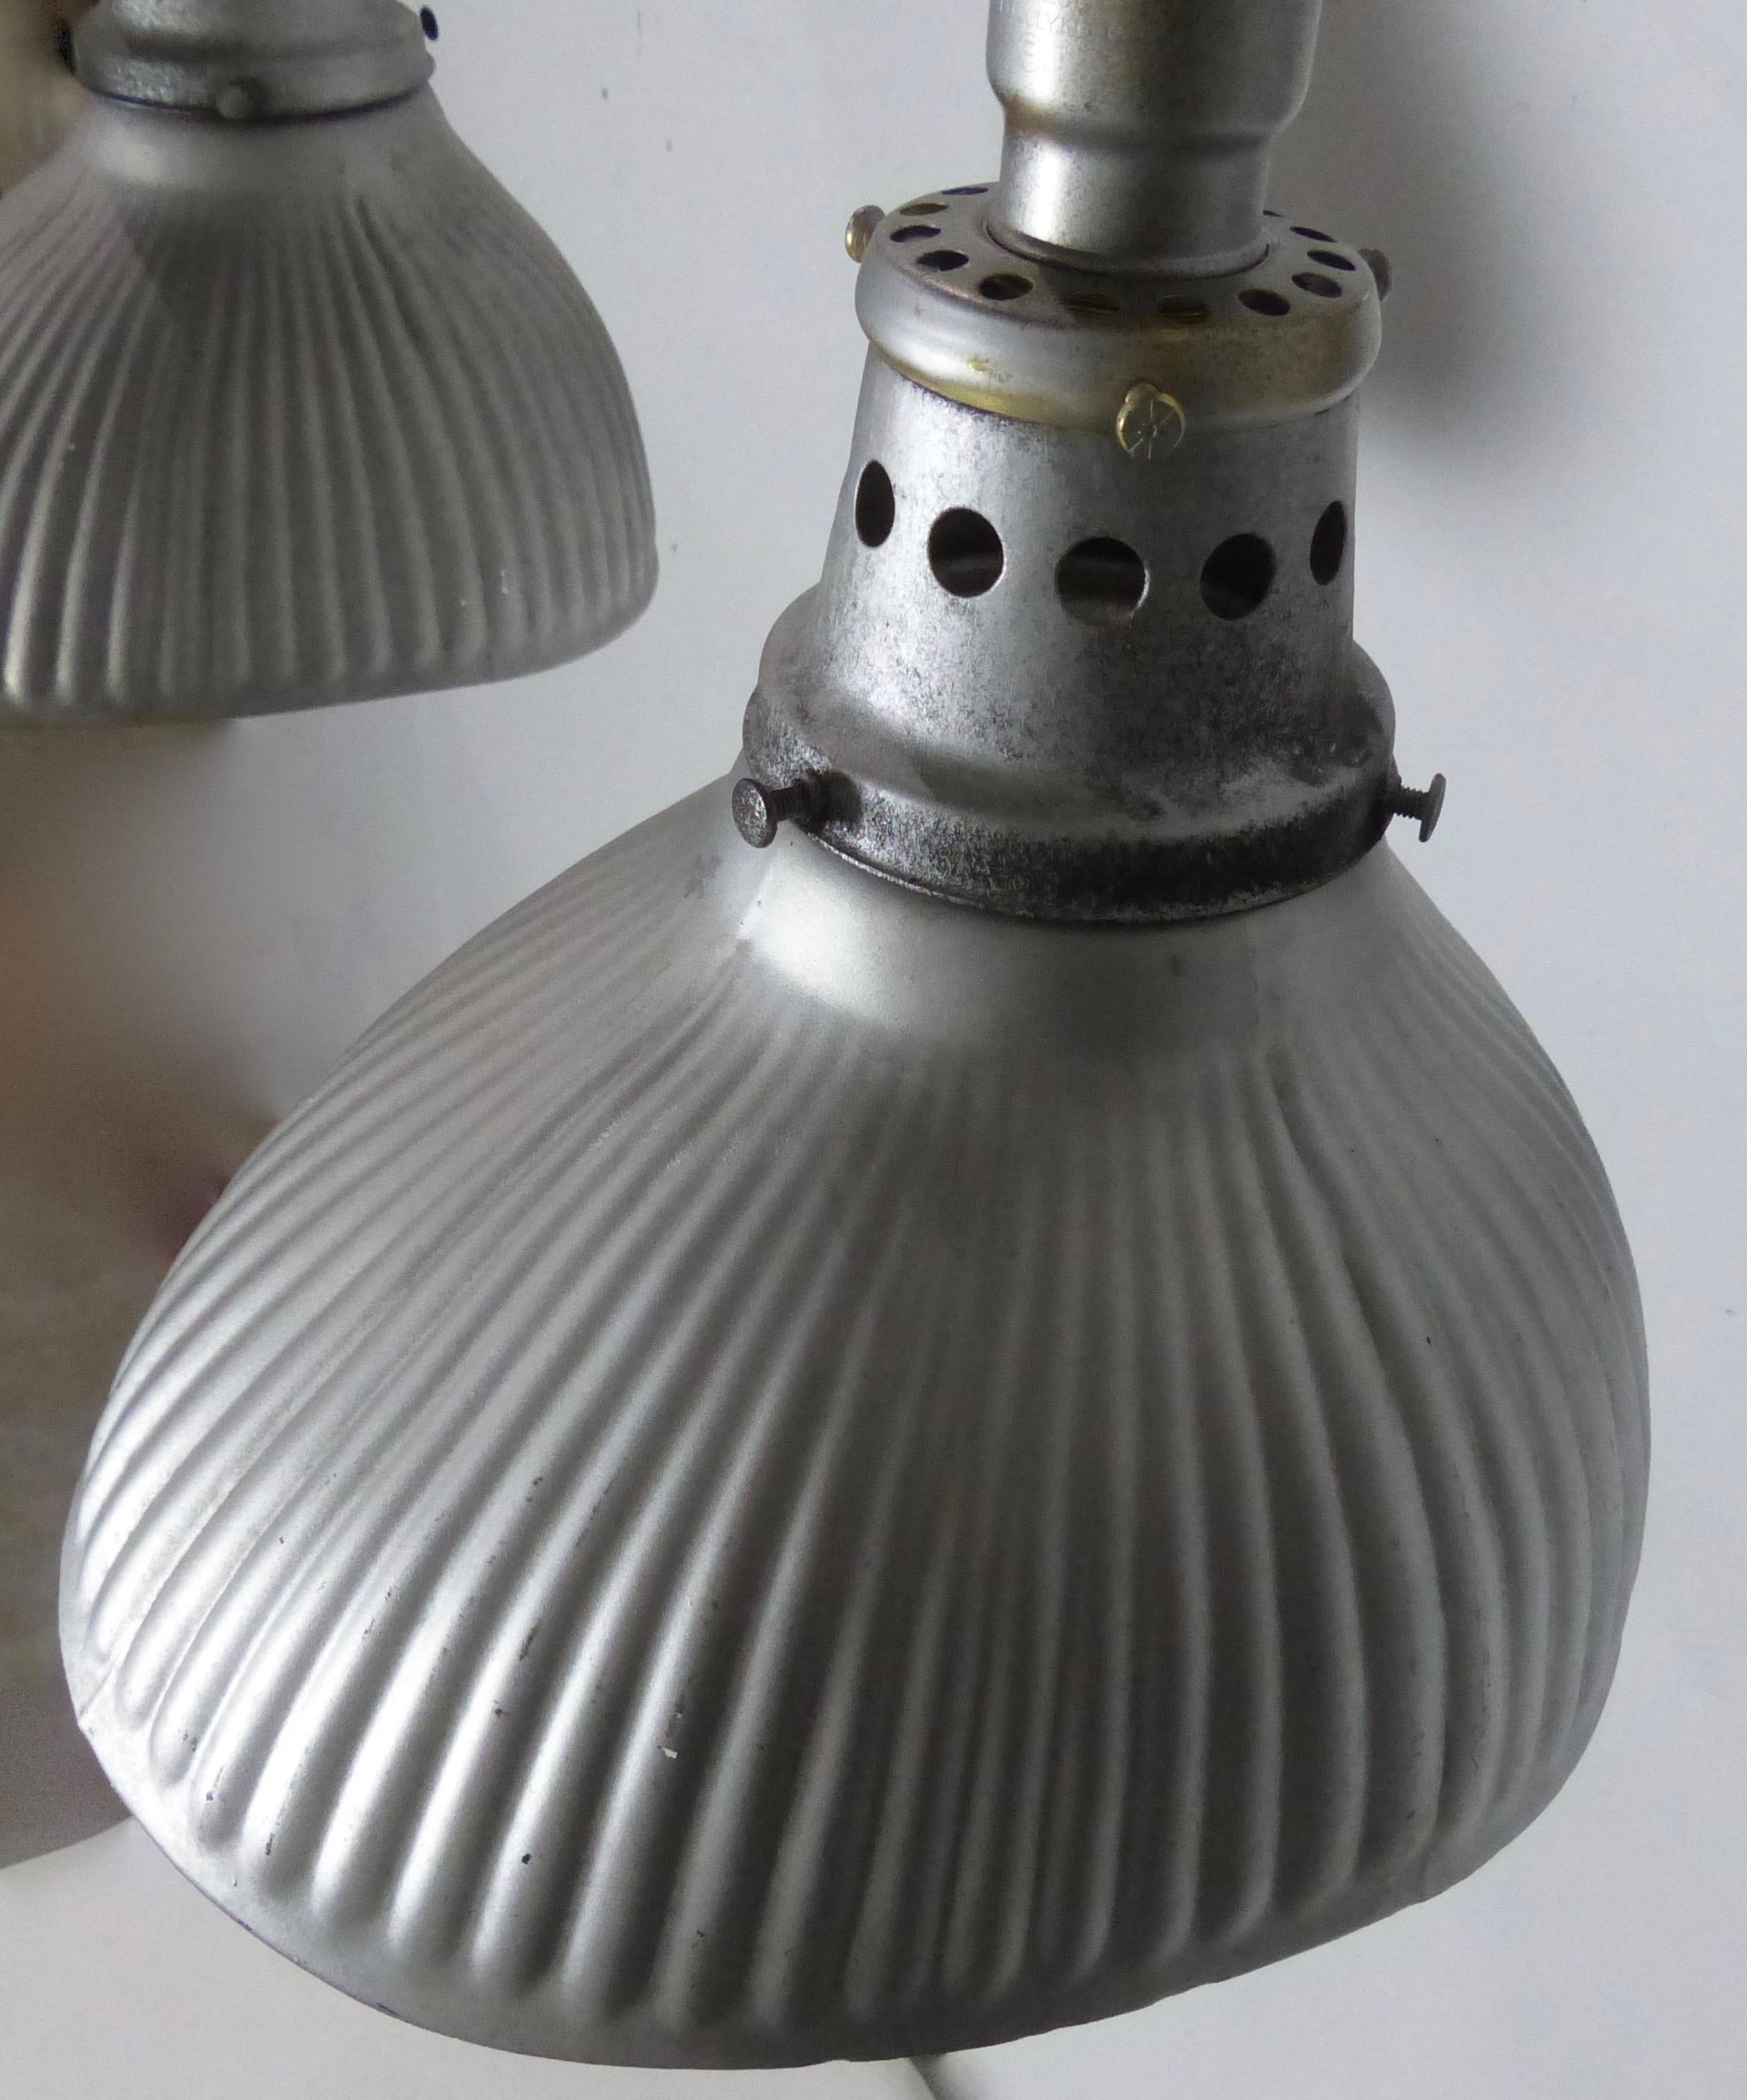 Matched set of three authentic industrial mercury X-ray wall sconces in silver, with original silvered shades. Produced by Curtis Lighting, a Pioneer of indirect lighting, X-ray lights feature metal shades lined with mercury glass, which creates a